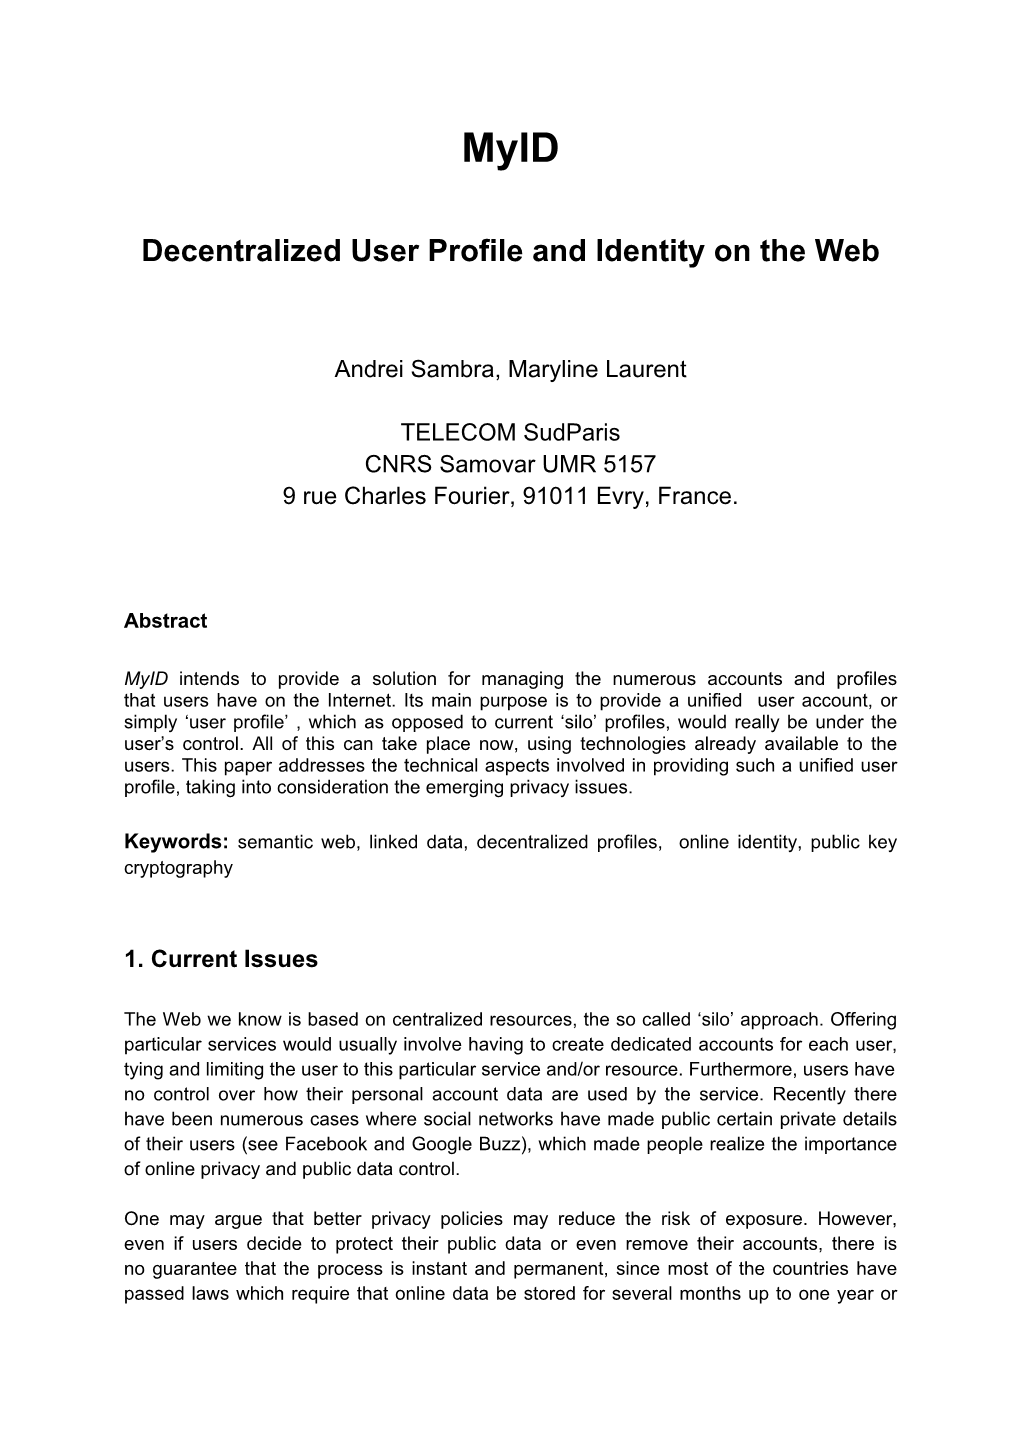 Decentralized User Profile and Identity on the Web